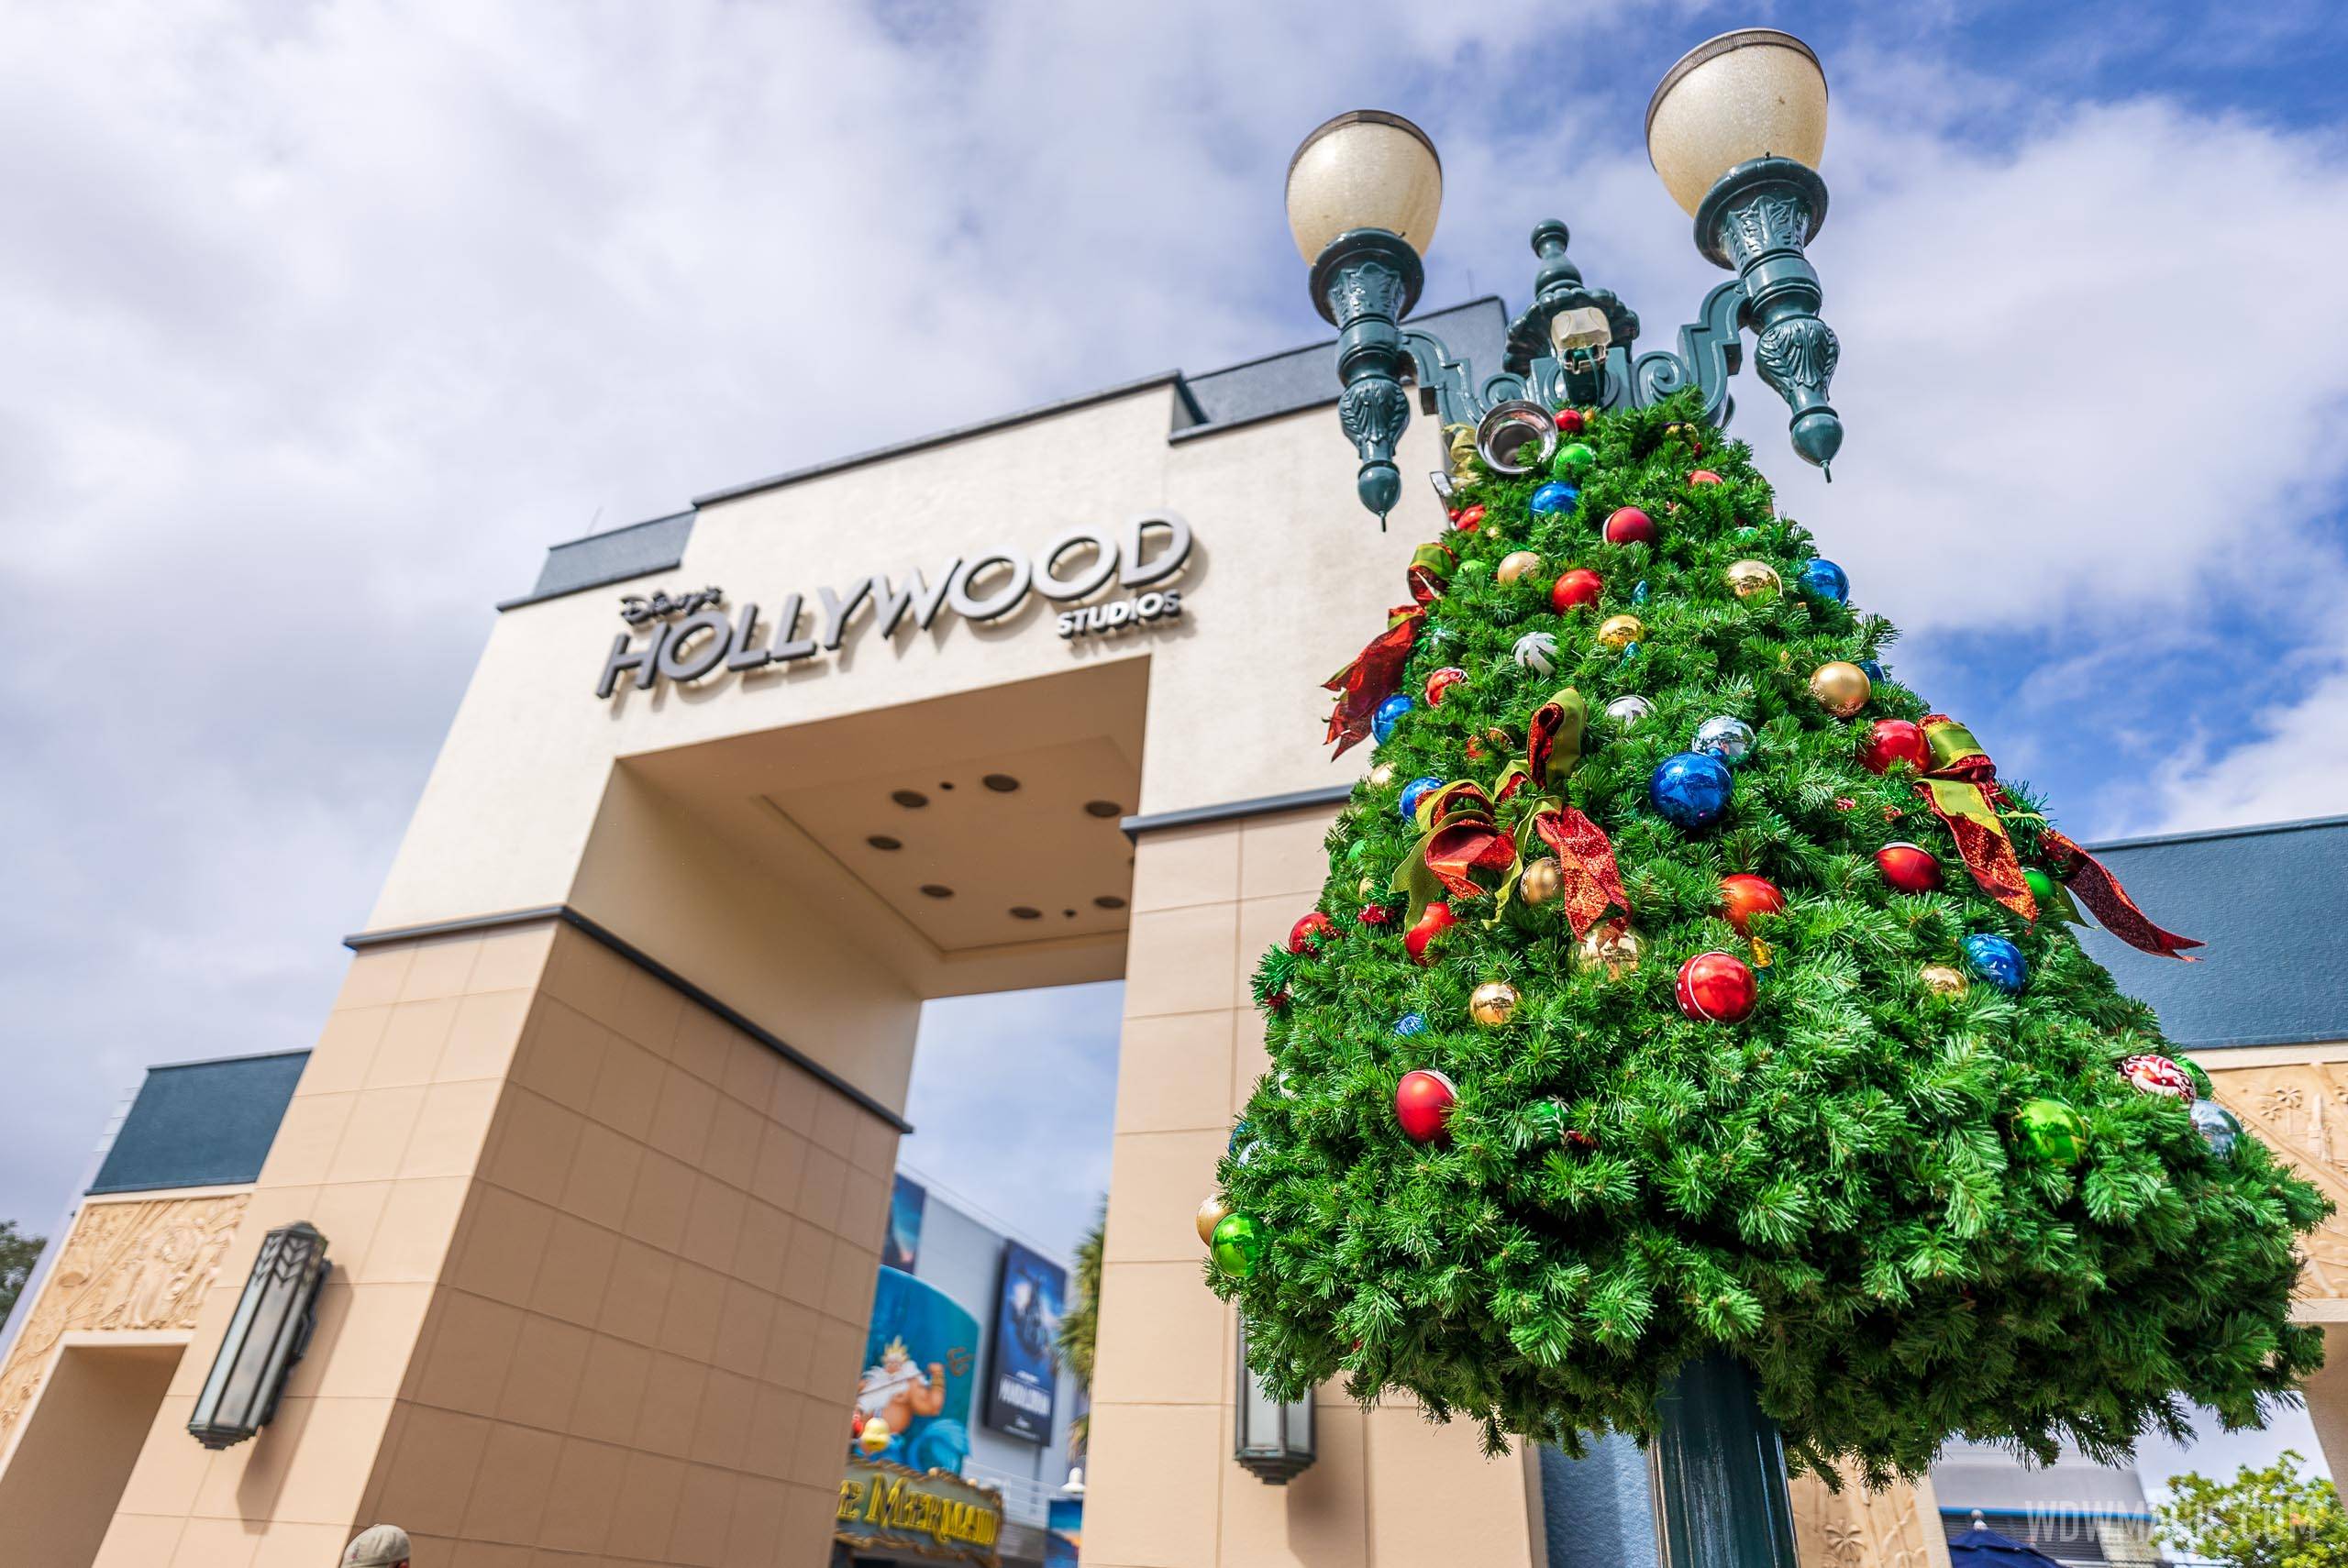 Disney's Hollywood Studios continues its 9am to 9pm operating day during the Christmas holiday period